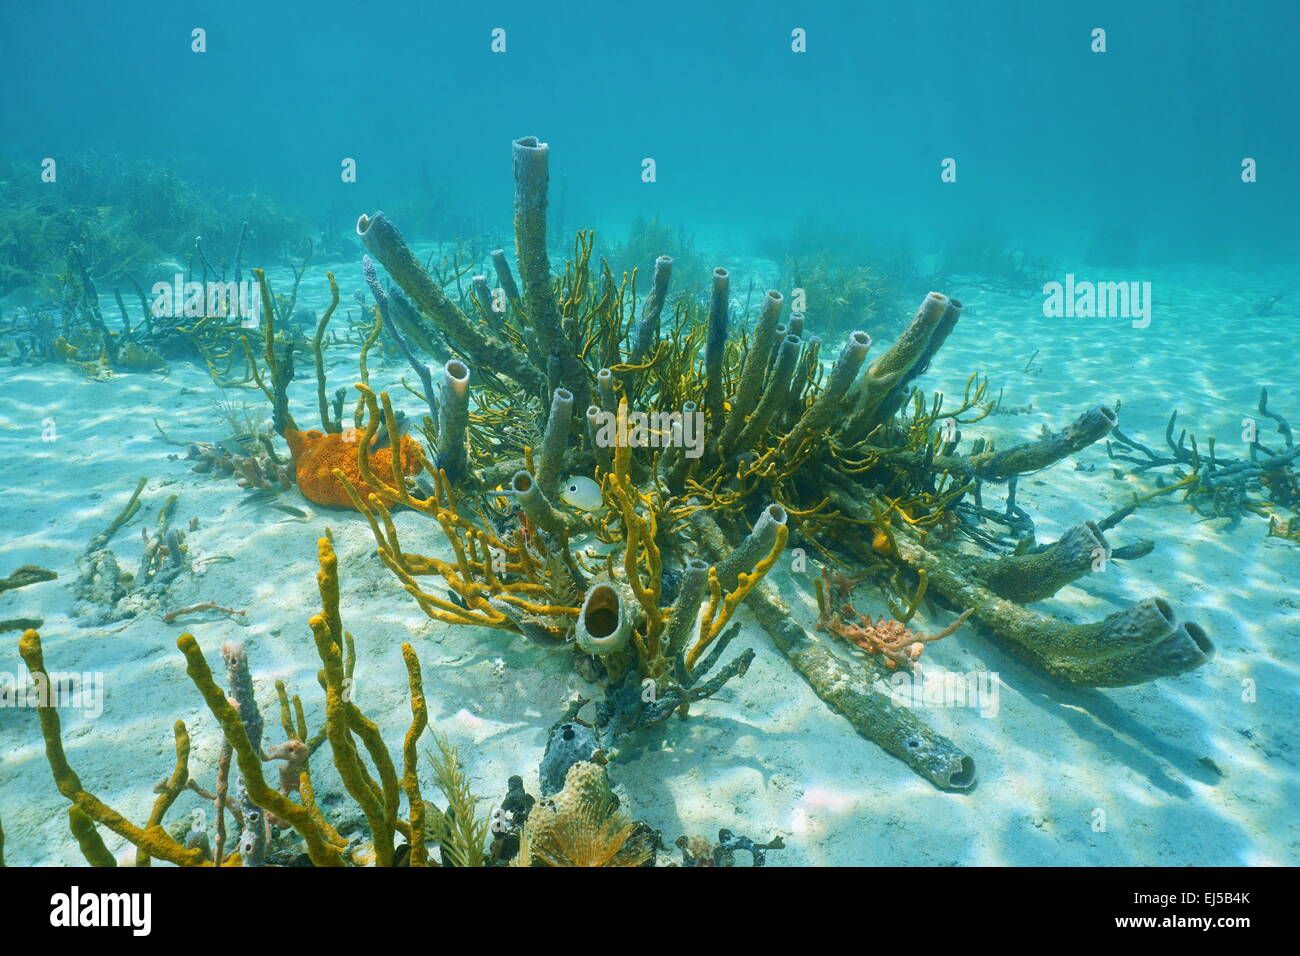 Underwater marine life on sandy seabed of the Caribbean sea, mostly branching vase sponge and scattered pore rope sponge Stock Photo